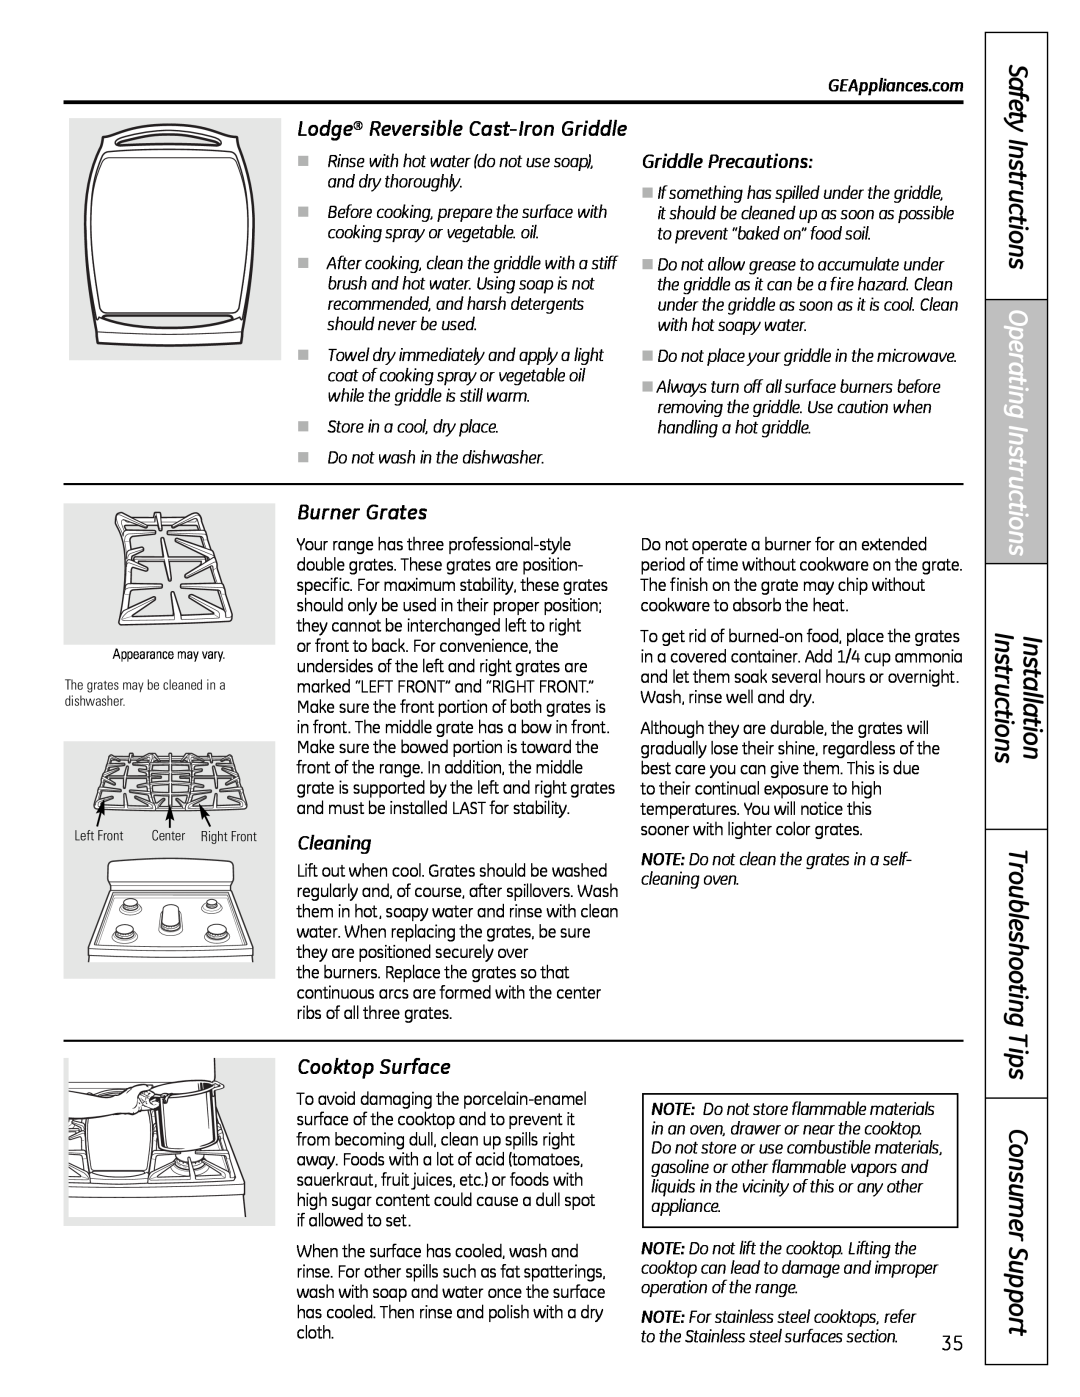 GE JGB810 Installation Instructions Troubleshooting, Lodge Reversible Cast-Iron Griddle, Burner Grates, Cooktop Surface 